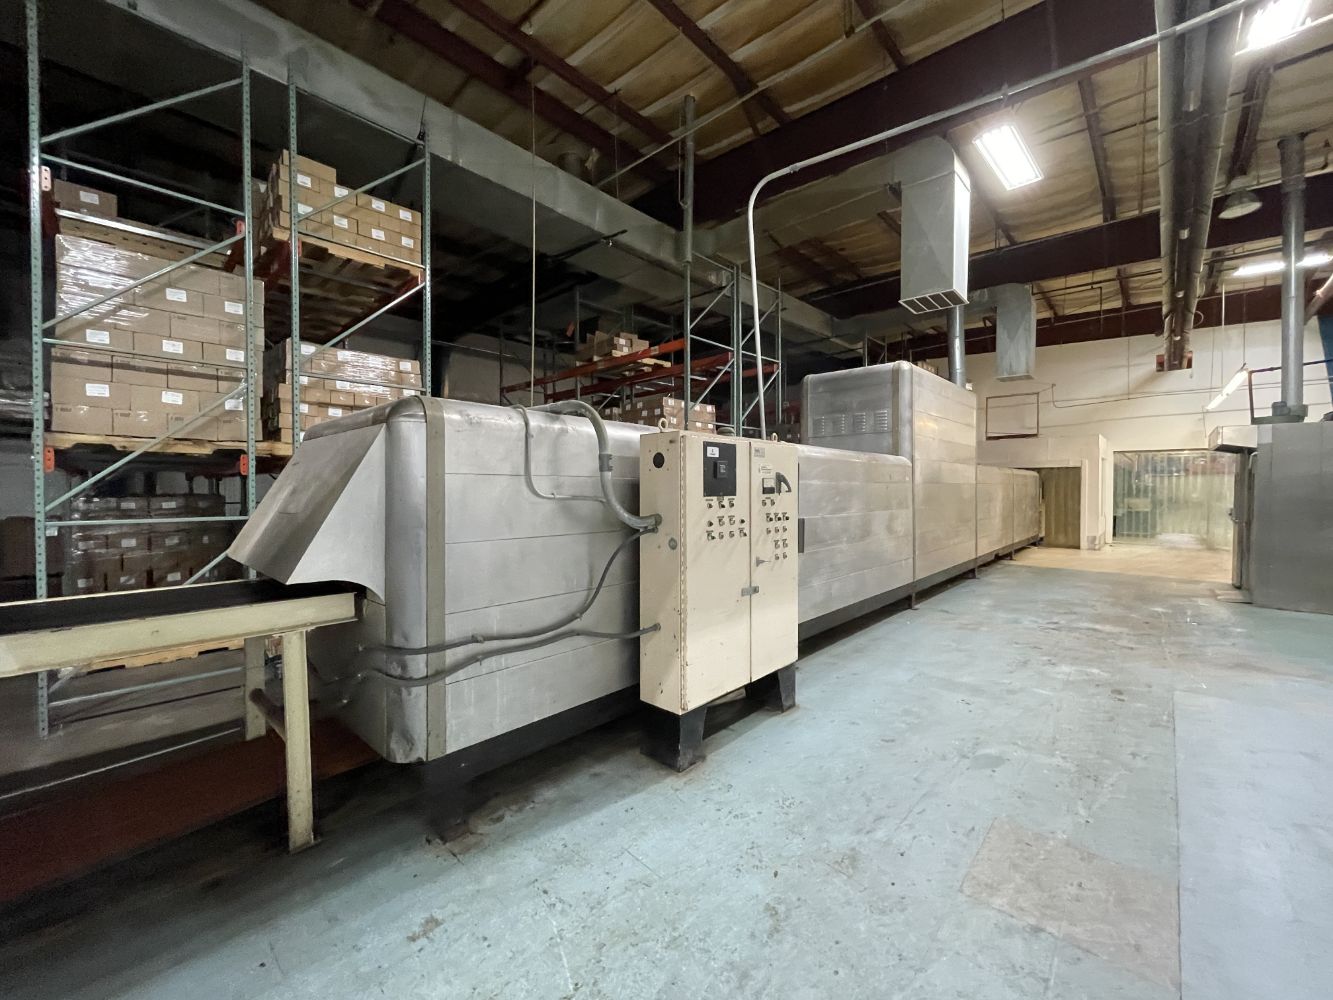 Cookie Bakery with Band Oven, Bread Stick Equipment, Rack Oven, Mixers, Flow and Shrink Wrappers